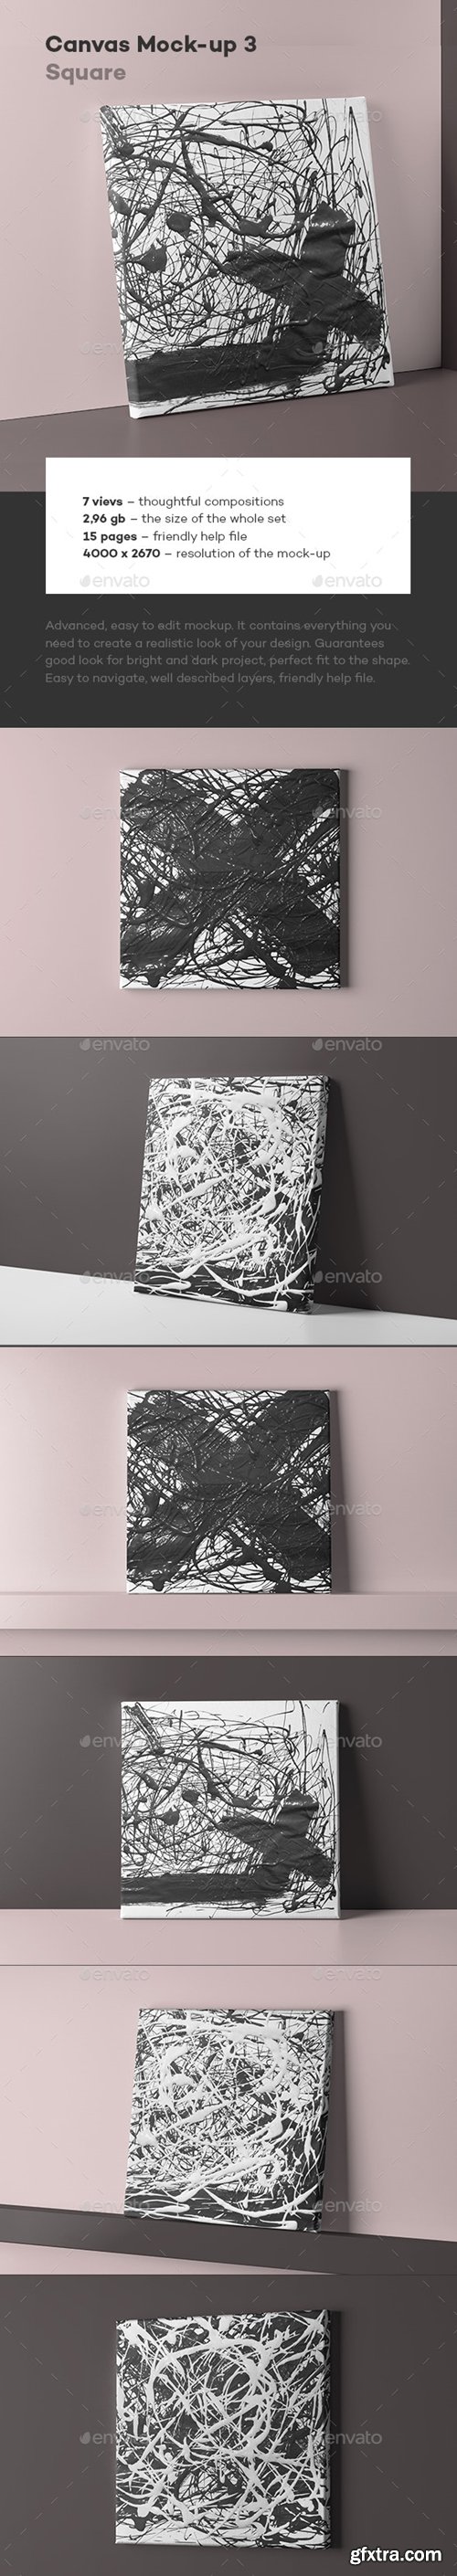 GraphicRiver - Canvas Mock-up 3 25103496